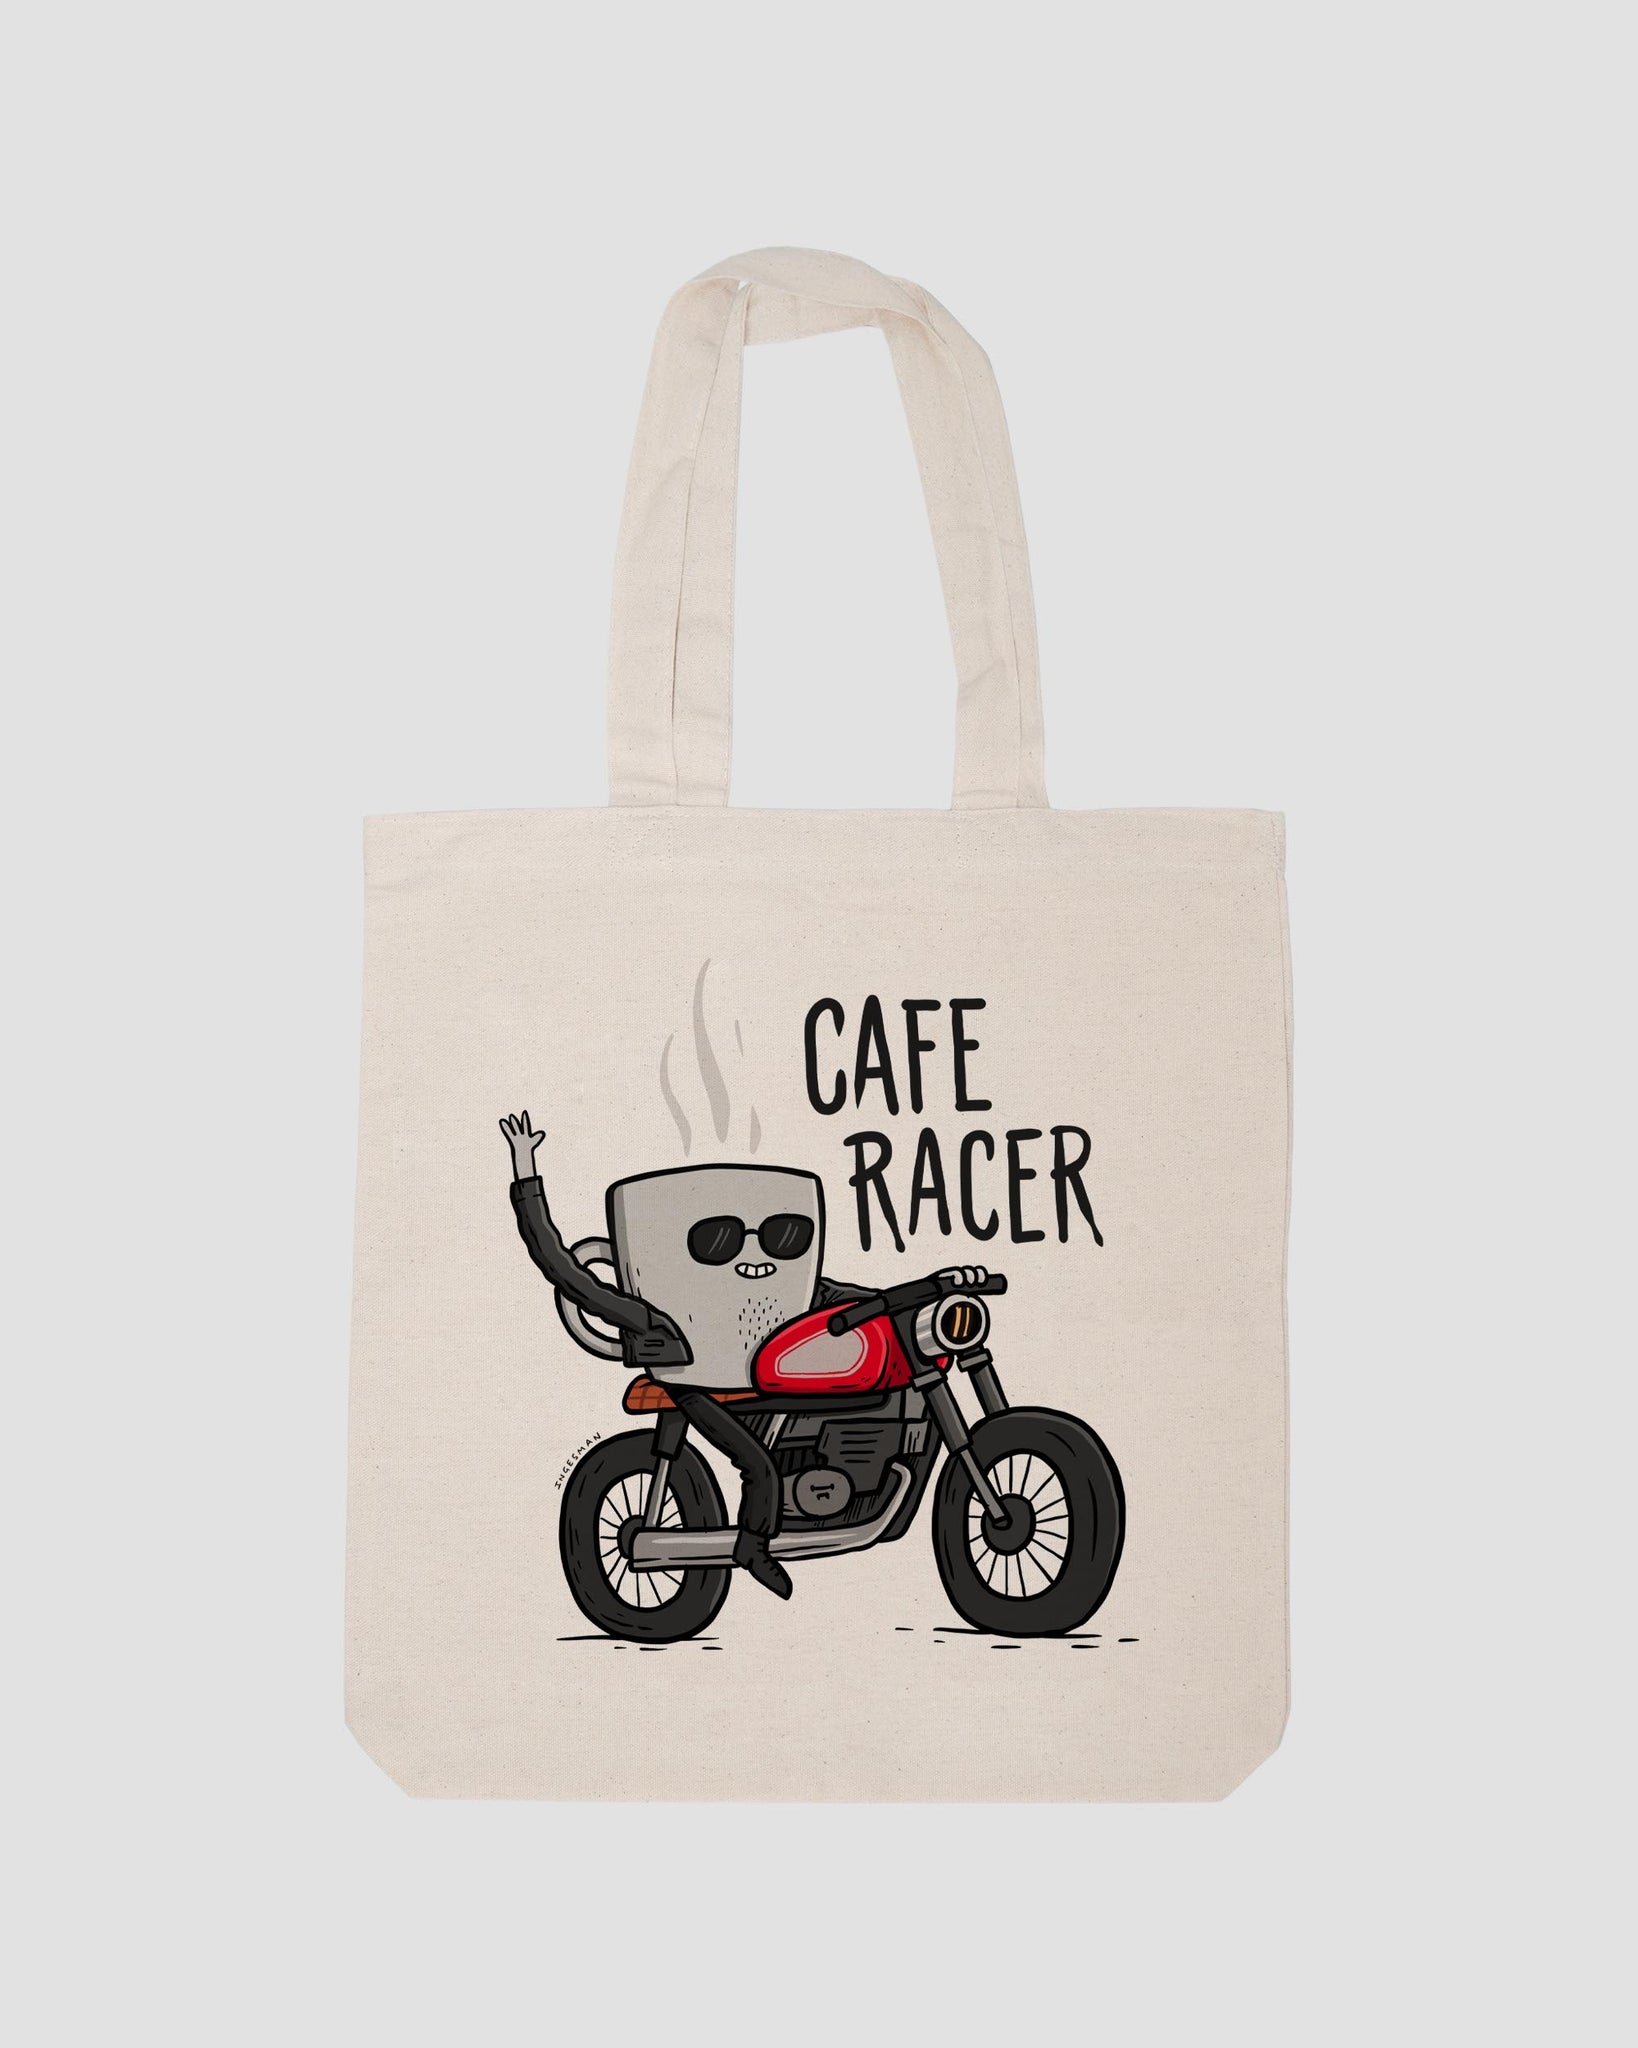 CAFE RACER TOTE